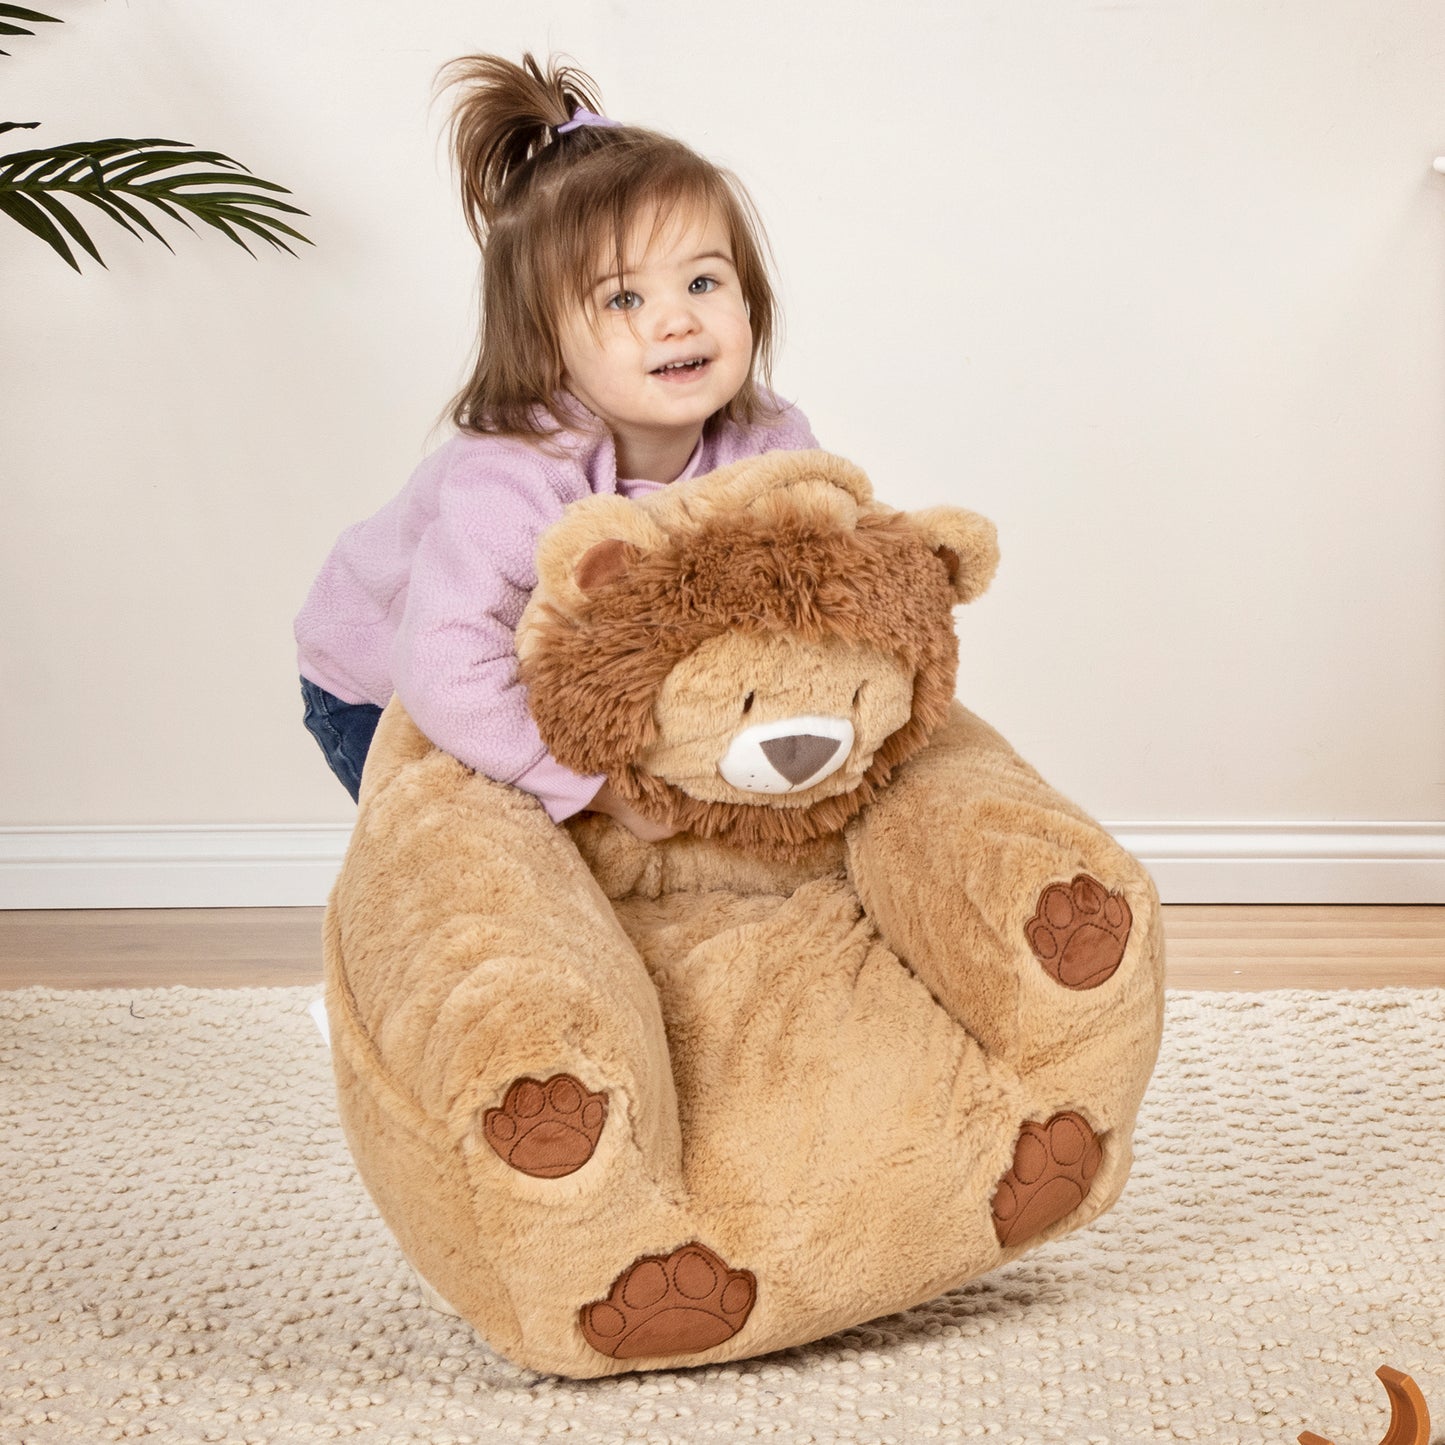 Toddler Lion Plush Pillow Character Chair by Cuddo Buddies®